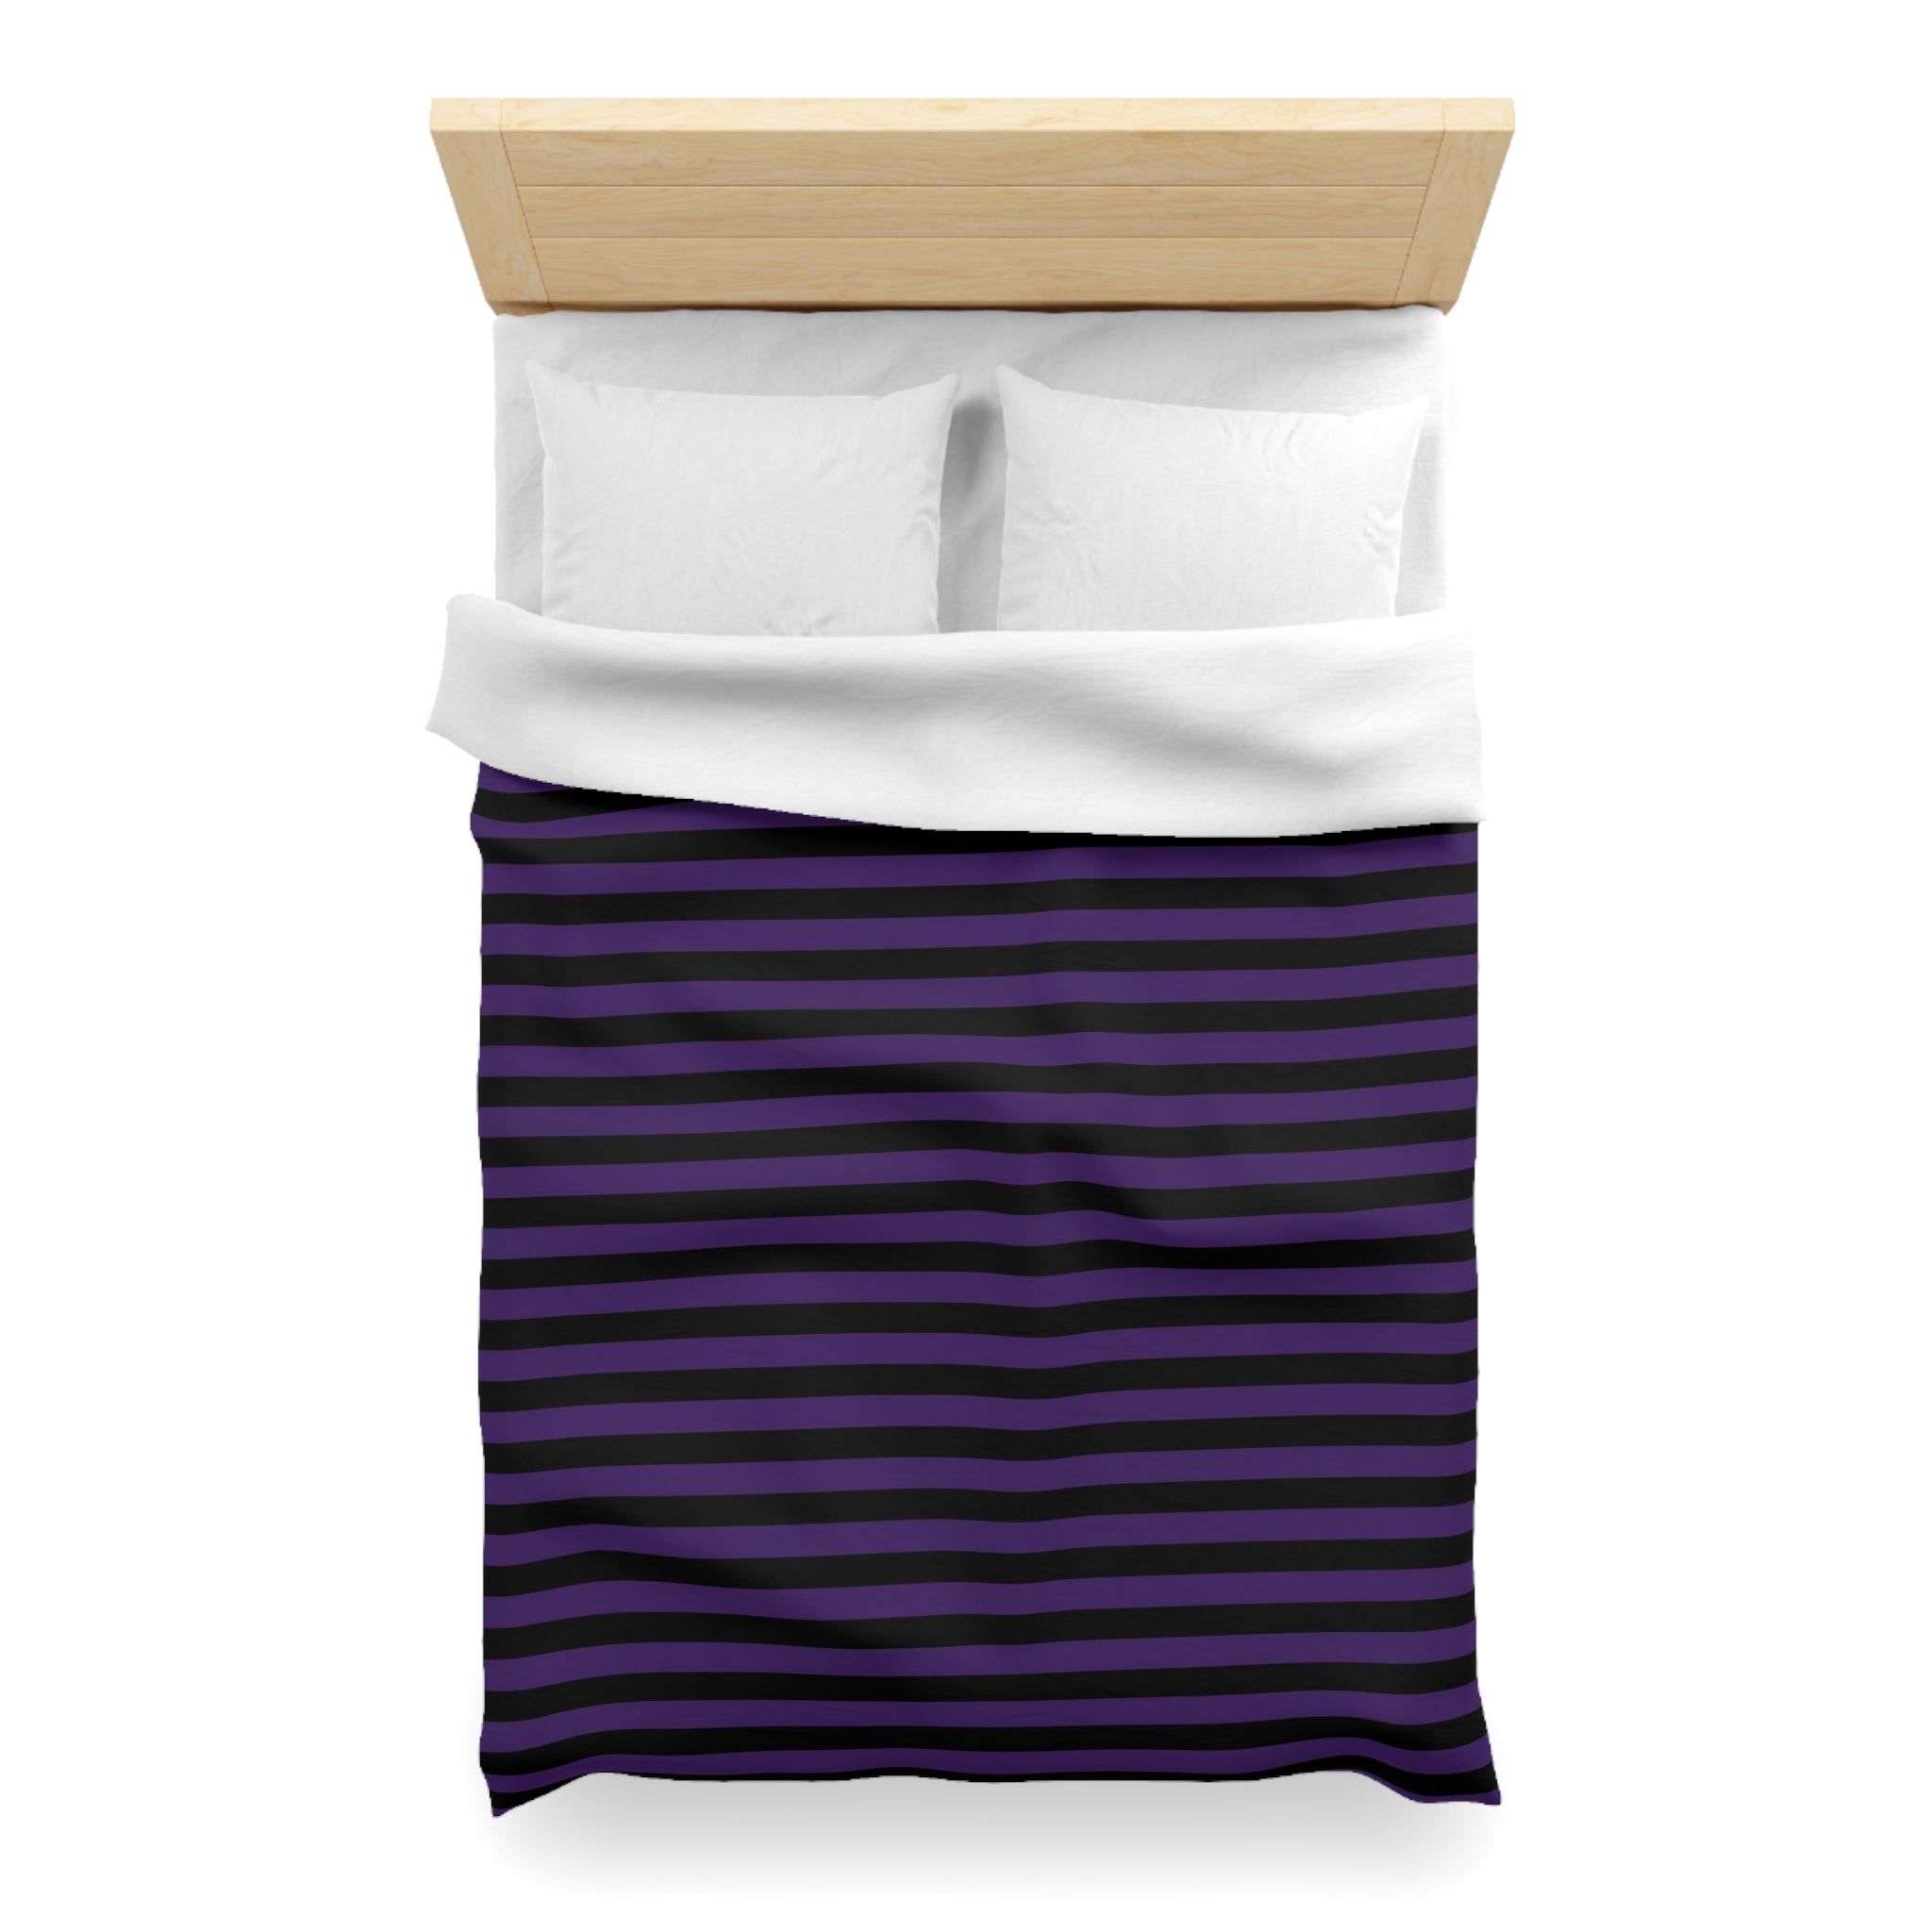 Sinister Stripes Purple and Black Striped Duvet Cover and Pillow Shams